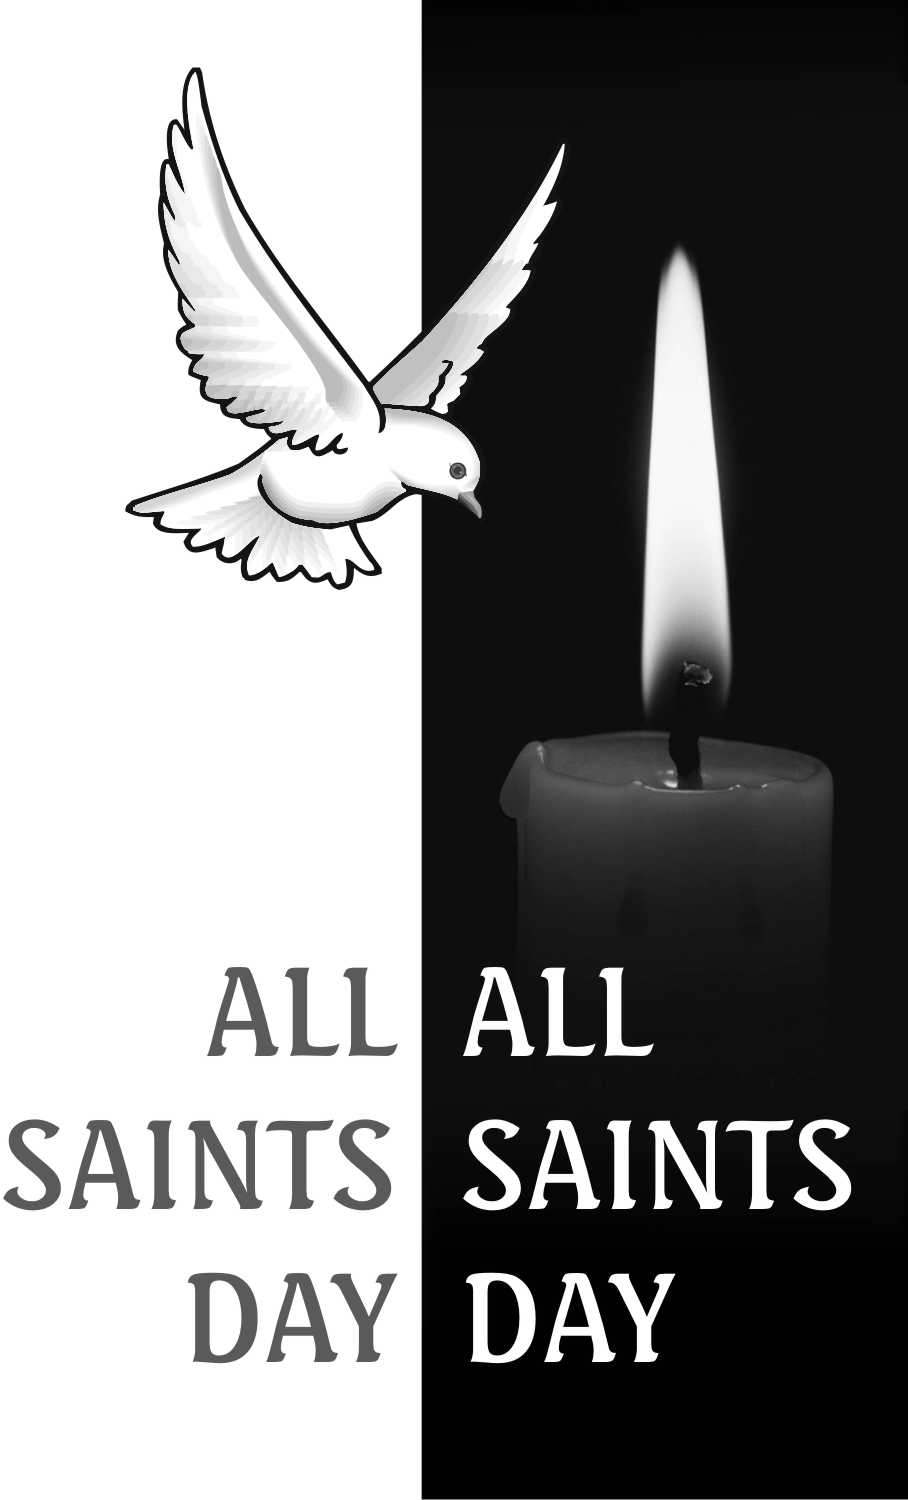 All Saints Day Clip Art and Happy Pictures | Download free, Share ...